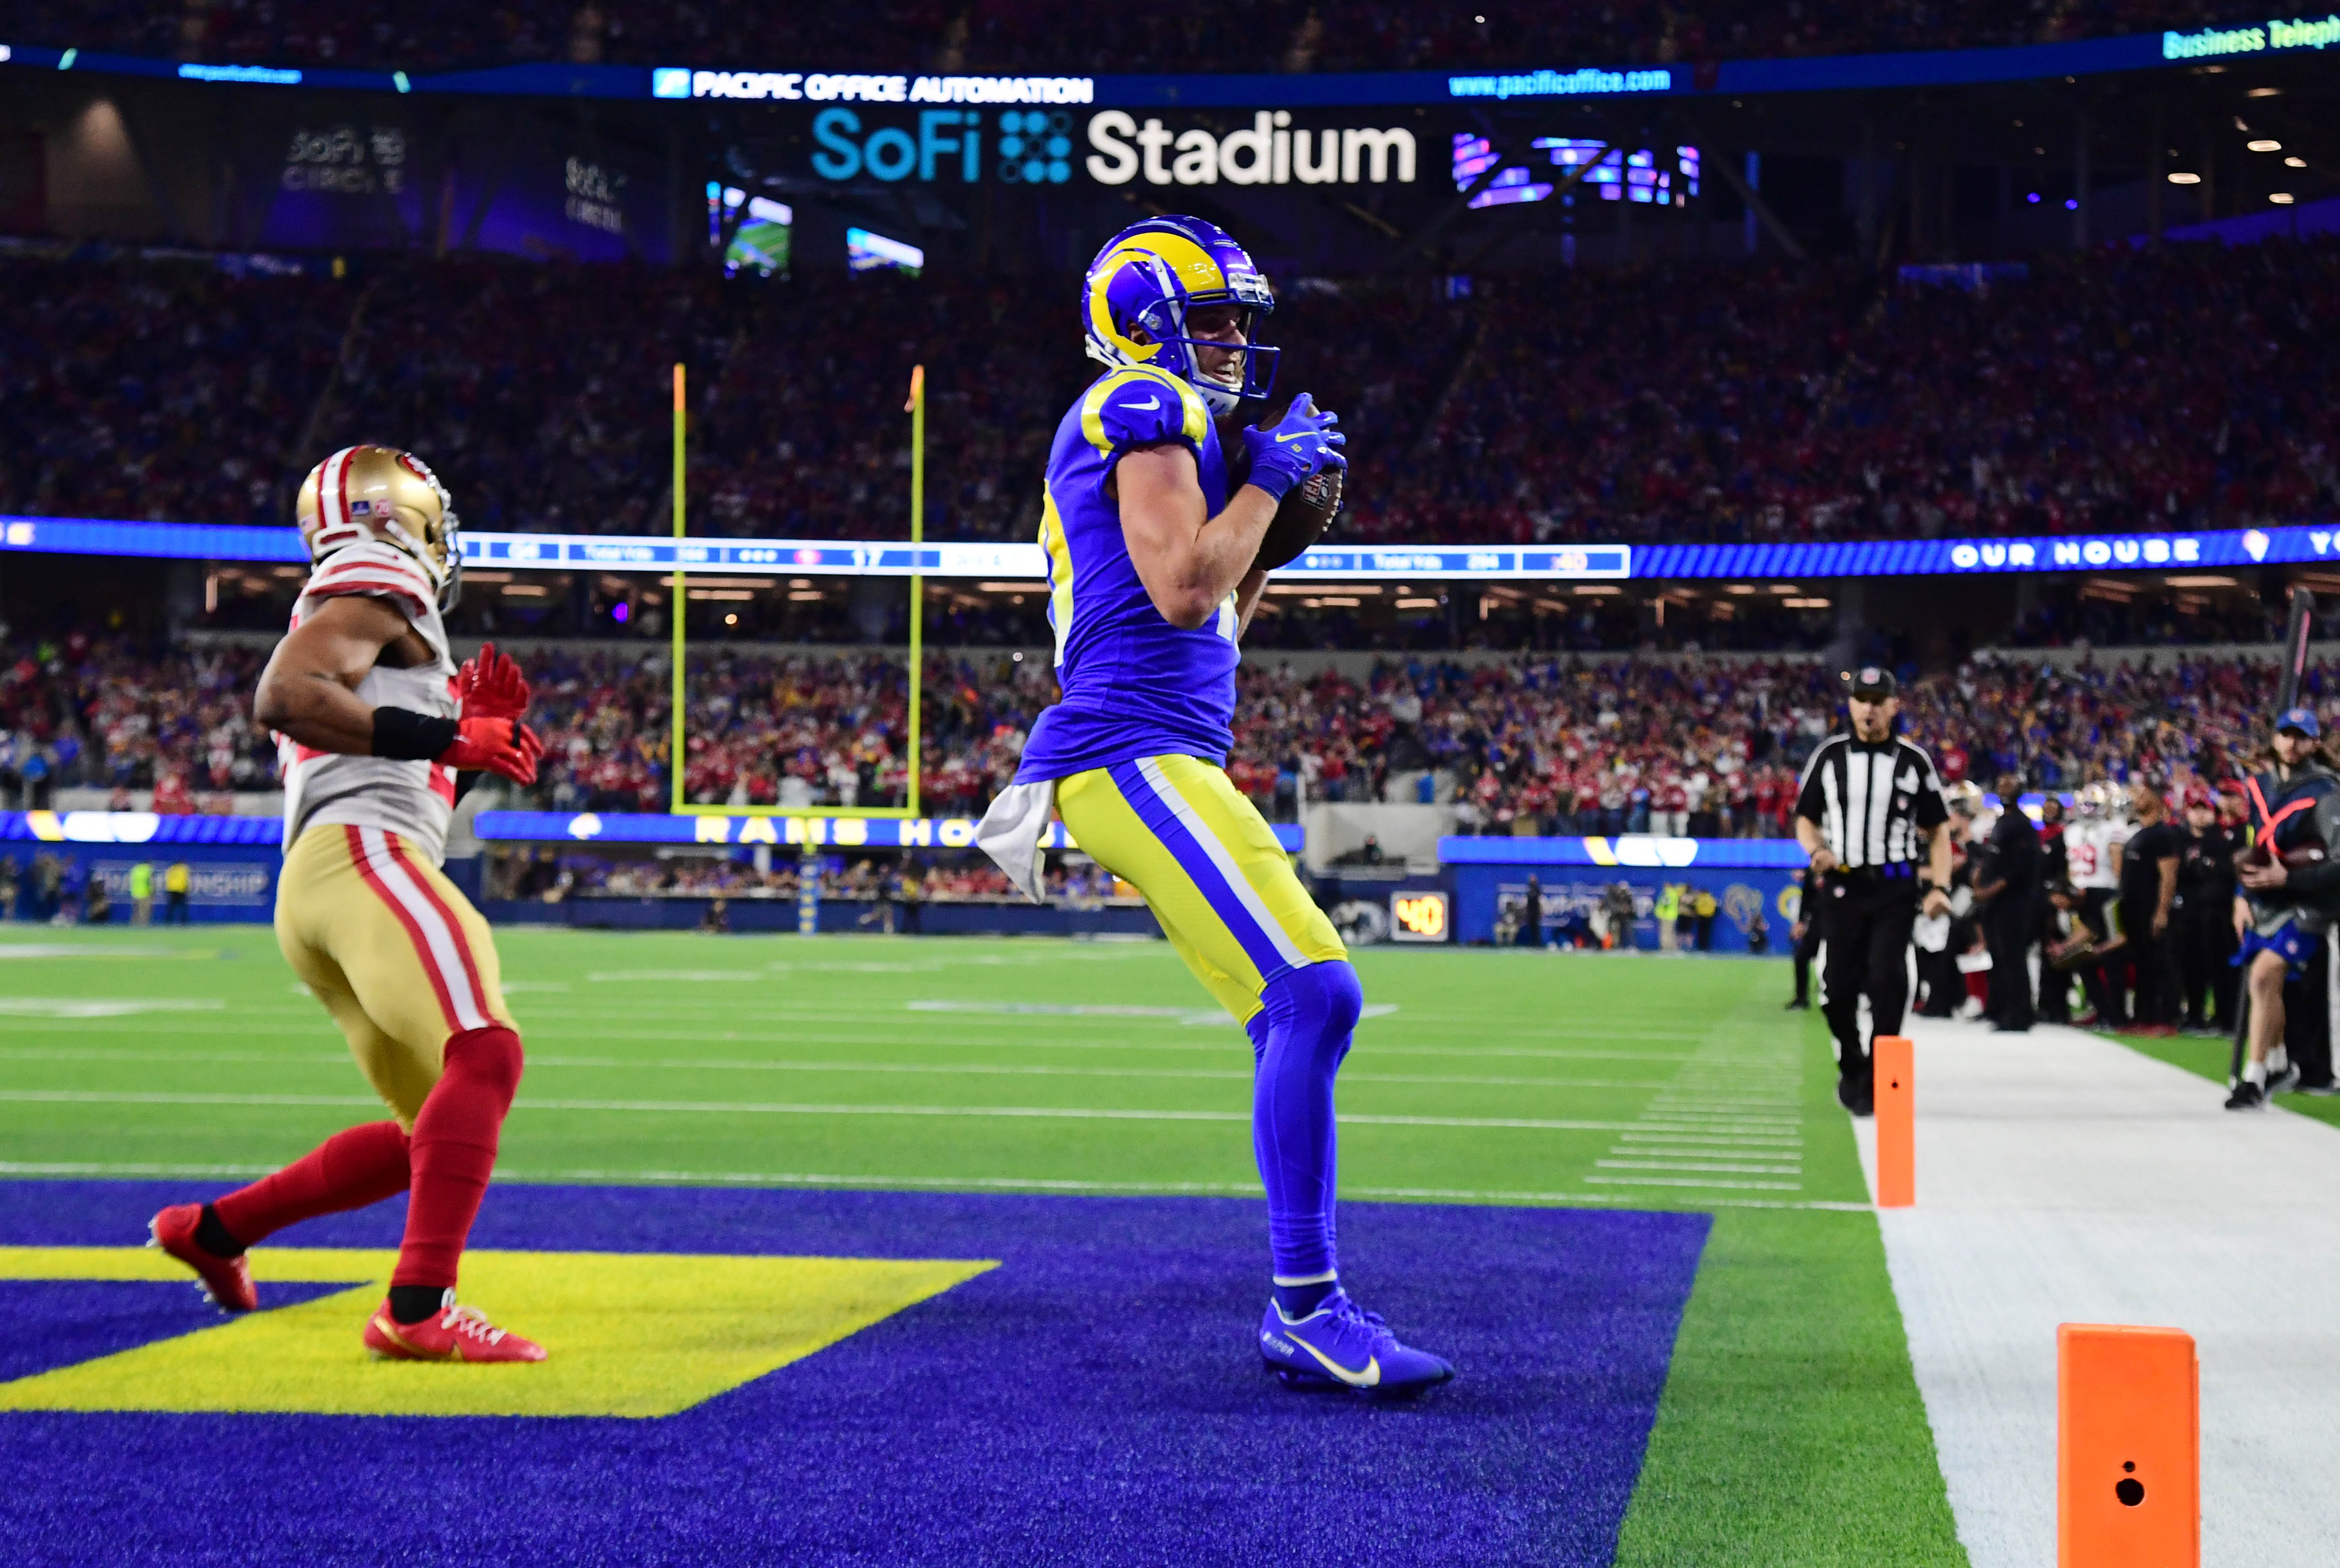 Cooper Kupp makes spectacular TD catch to give Rams late lead vs. 49ers